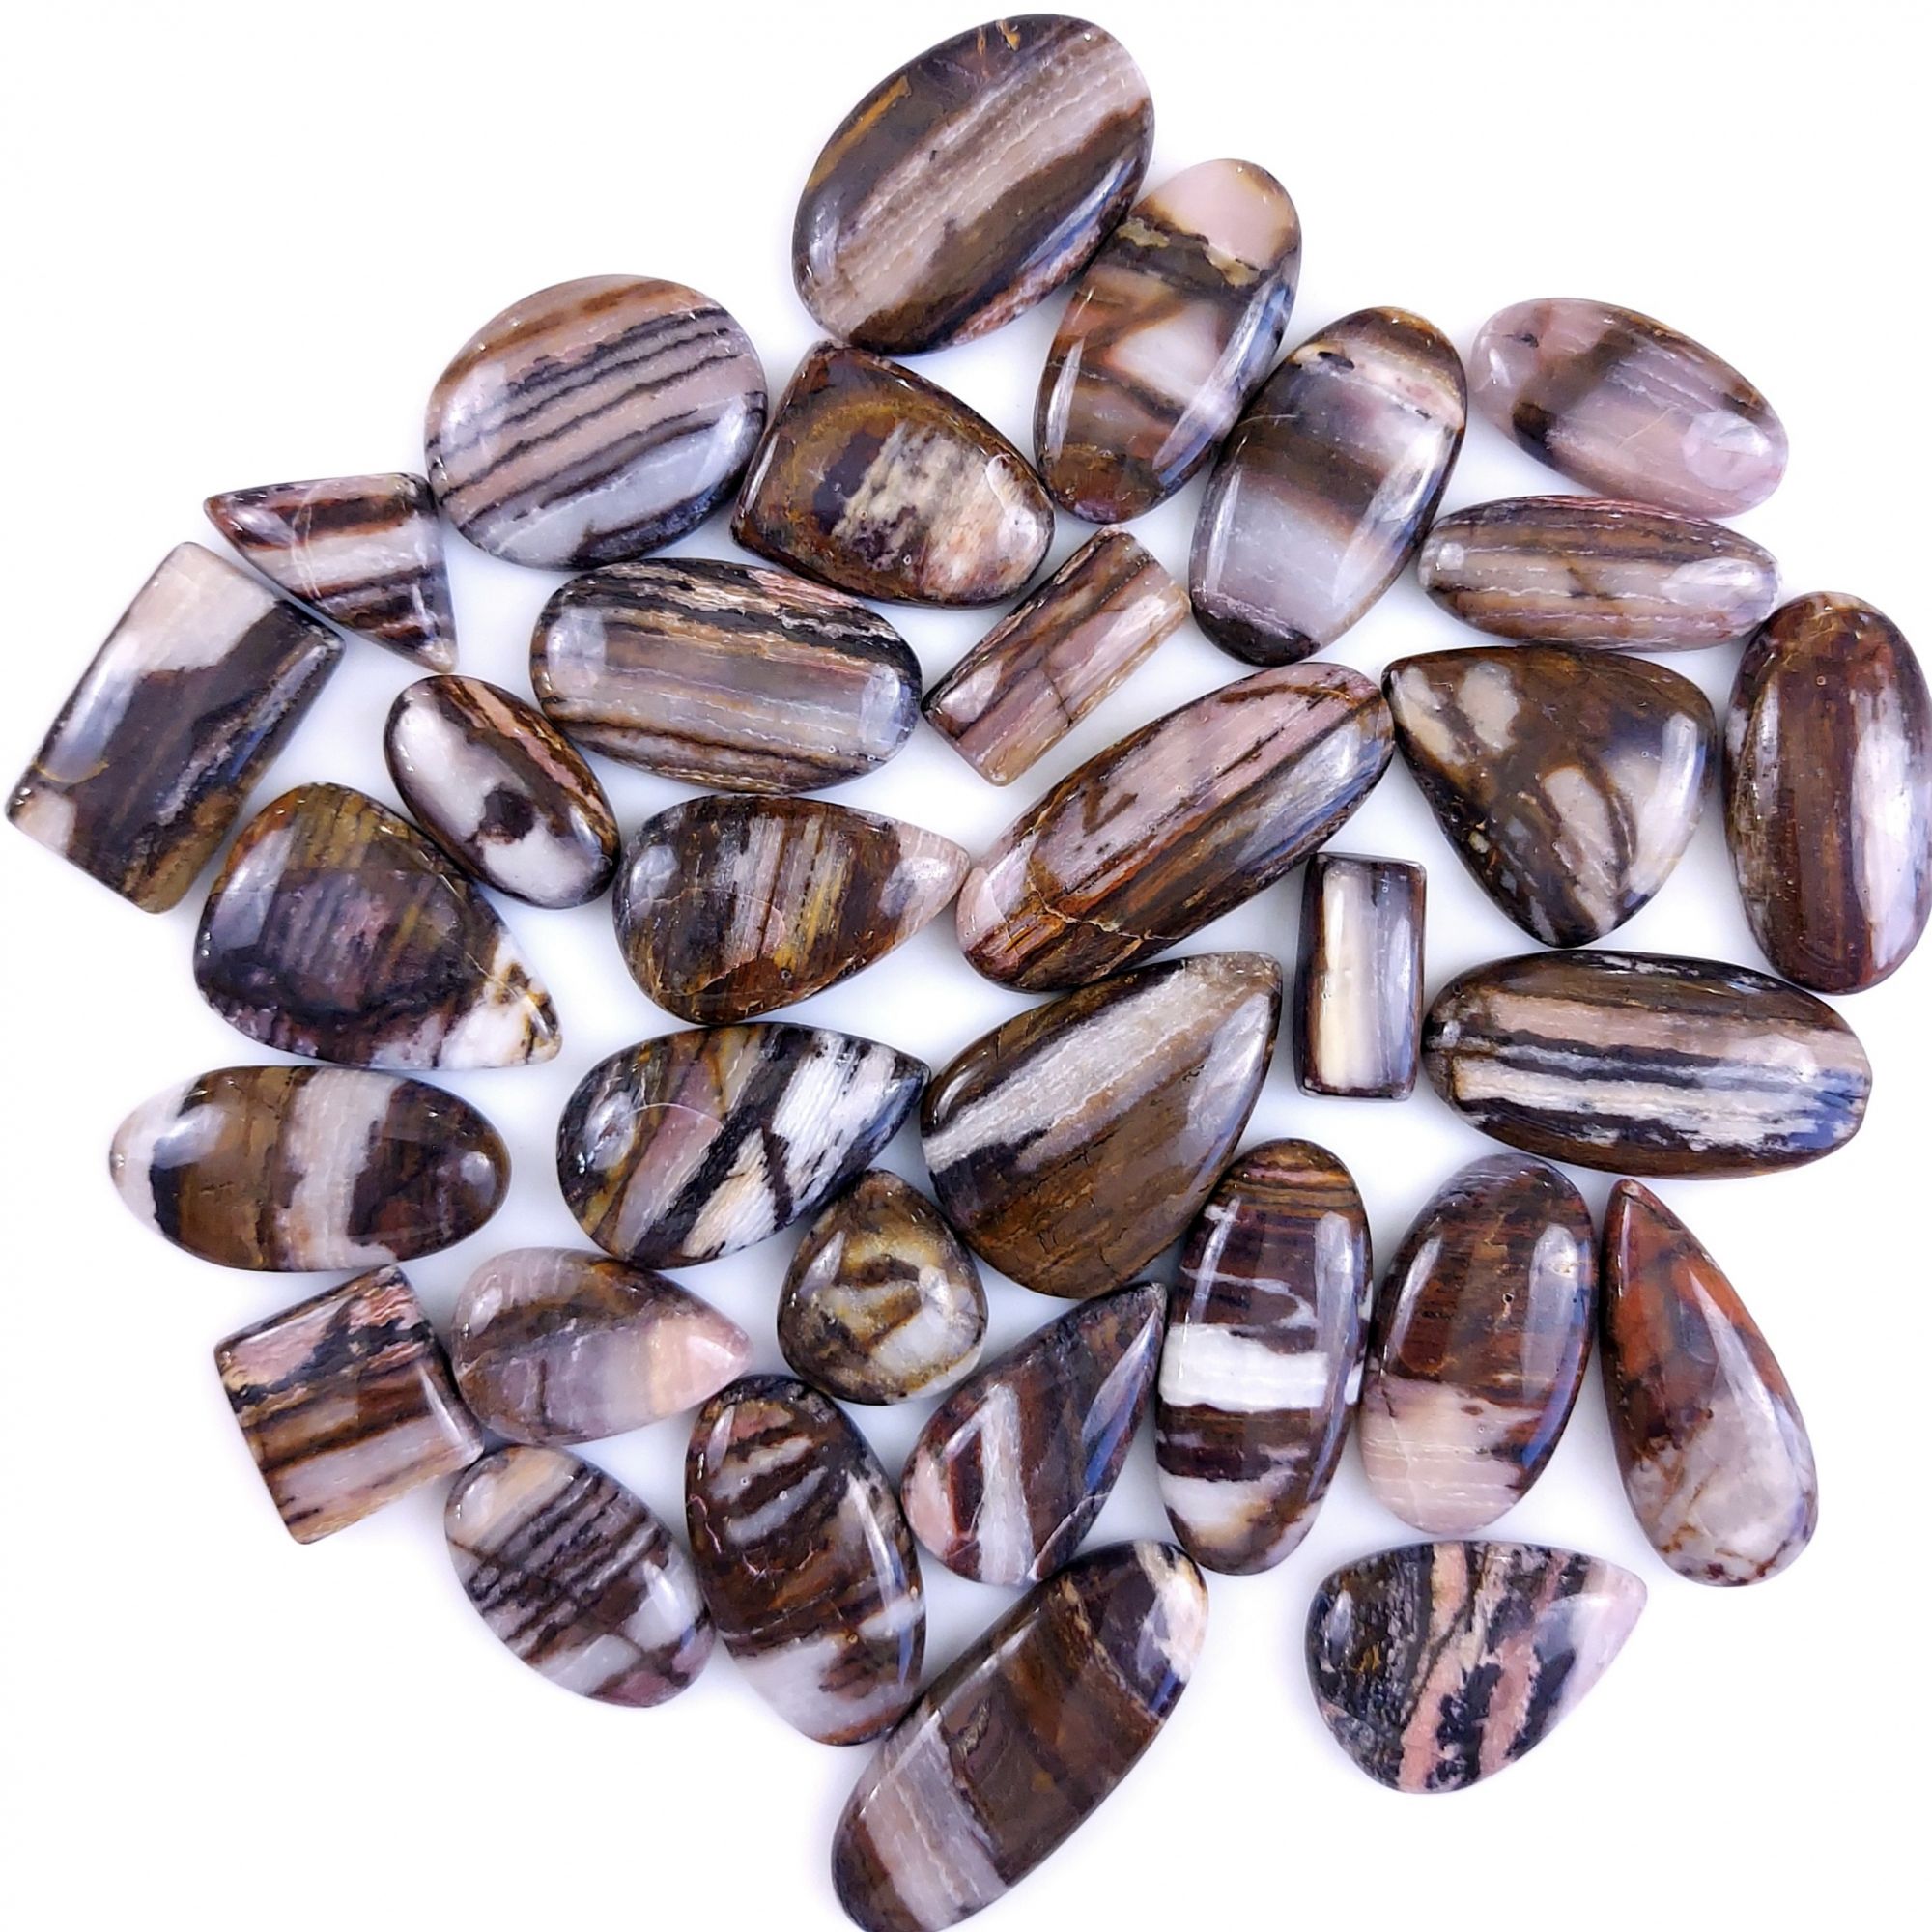 33Pcs 793Cts Natural Brown Banded Jasper Loose Cabochon Gemstone Lot  for Jewelry Making 38x16 18x14mm#1388